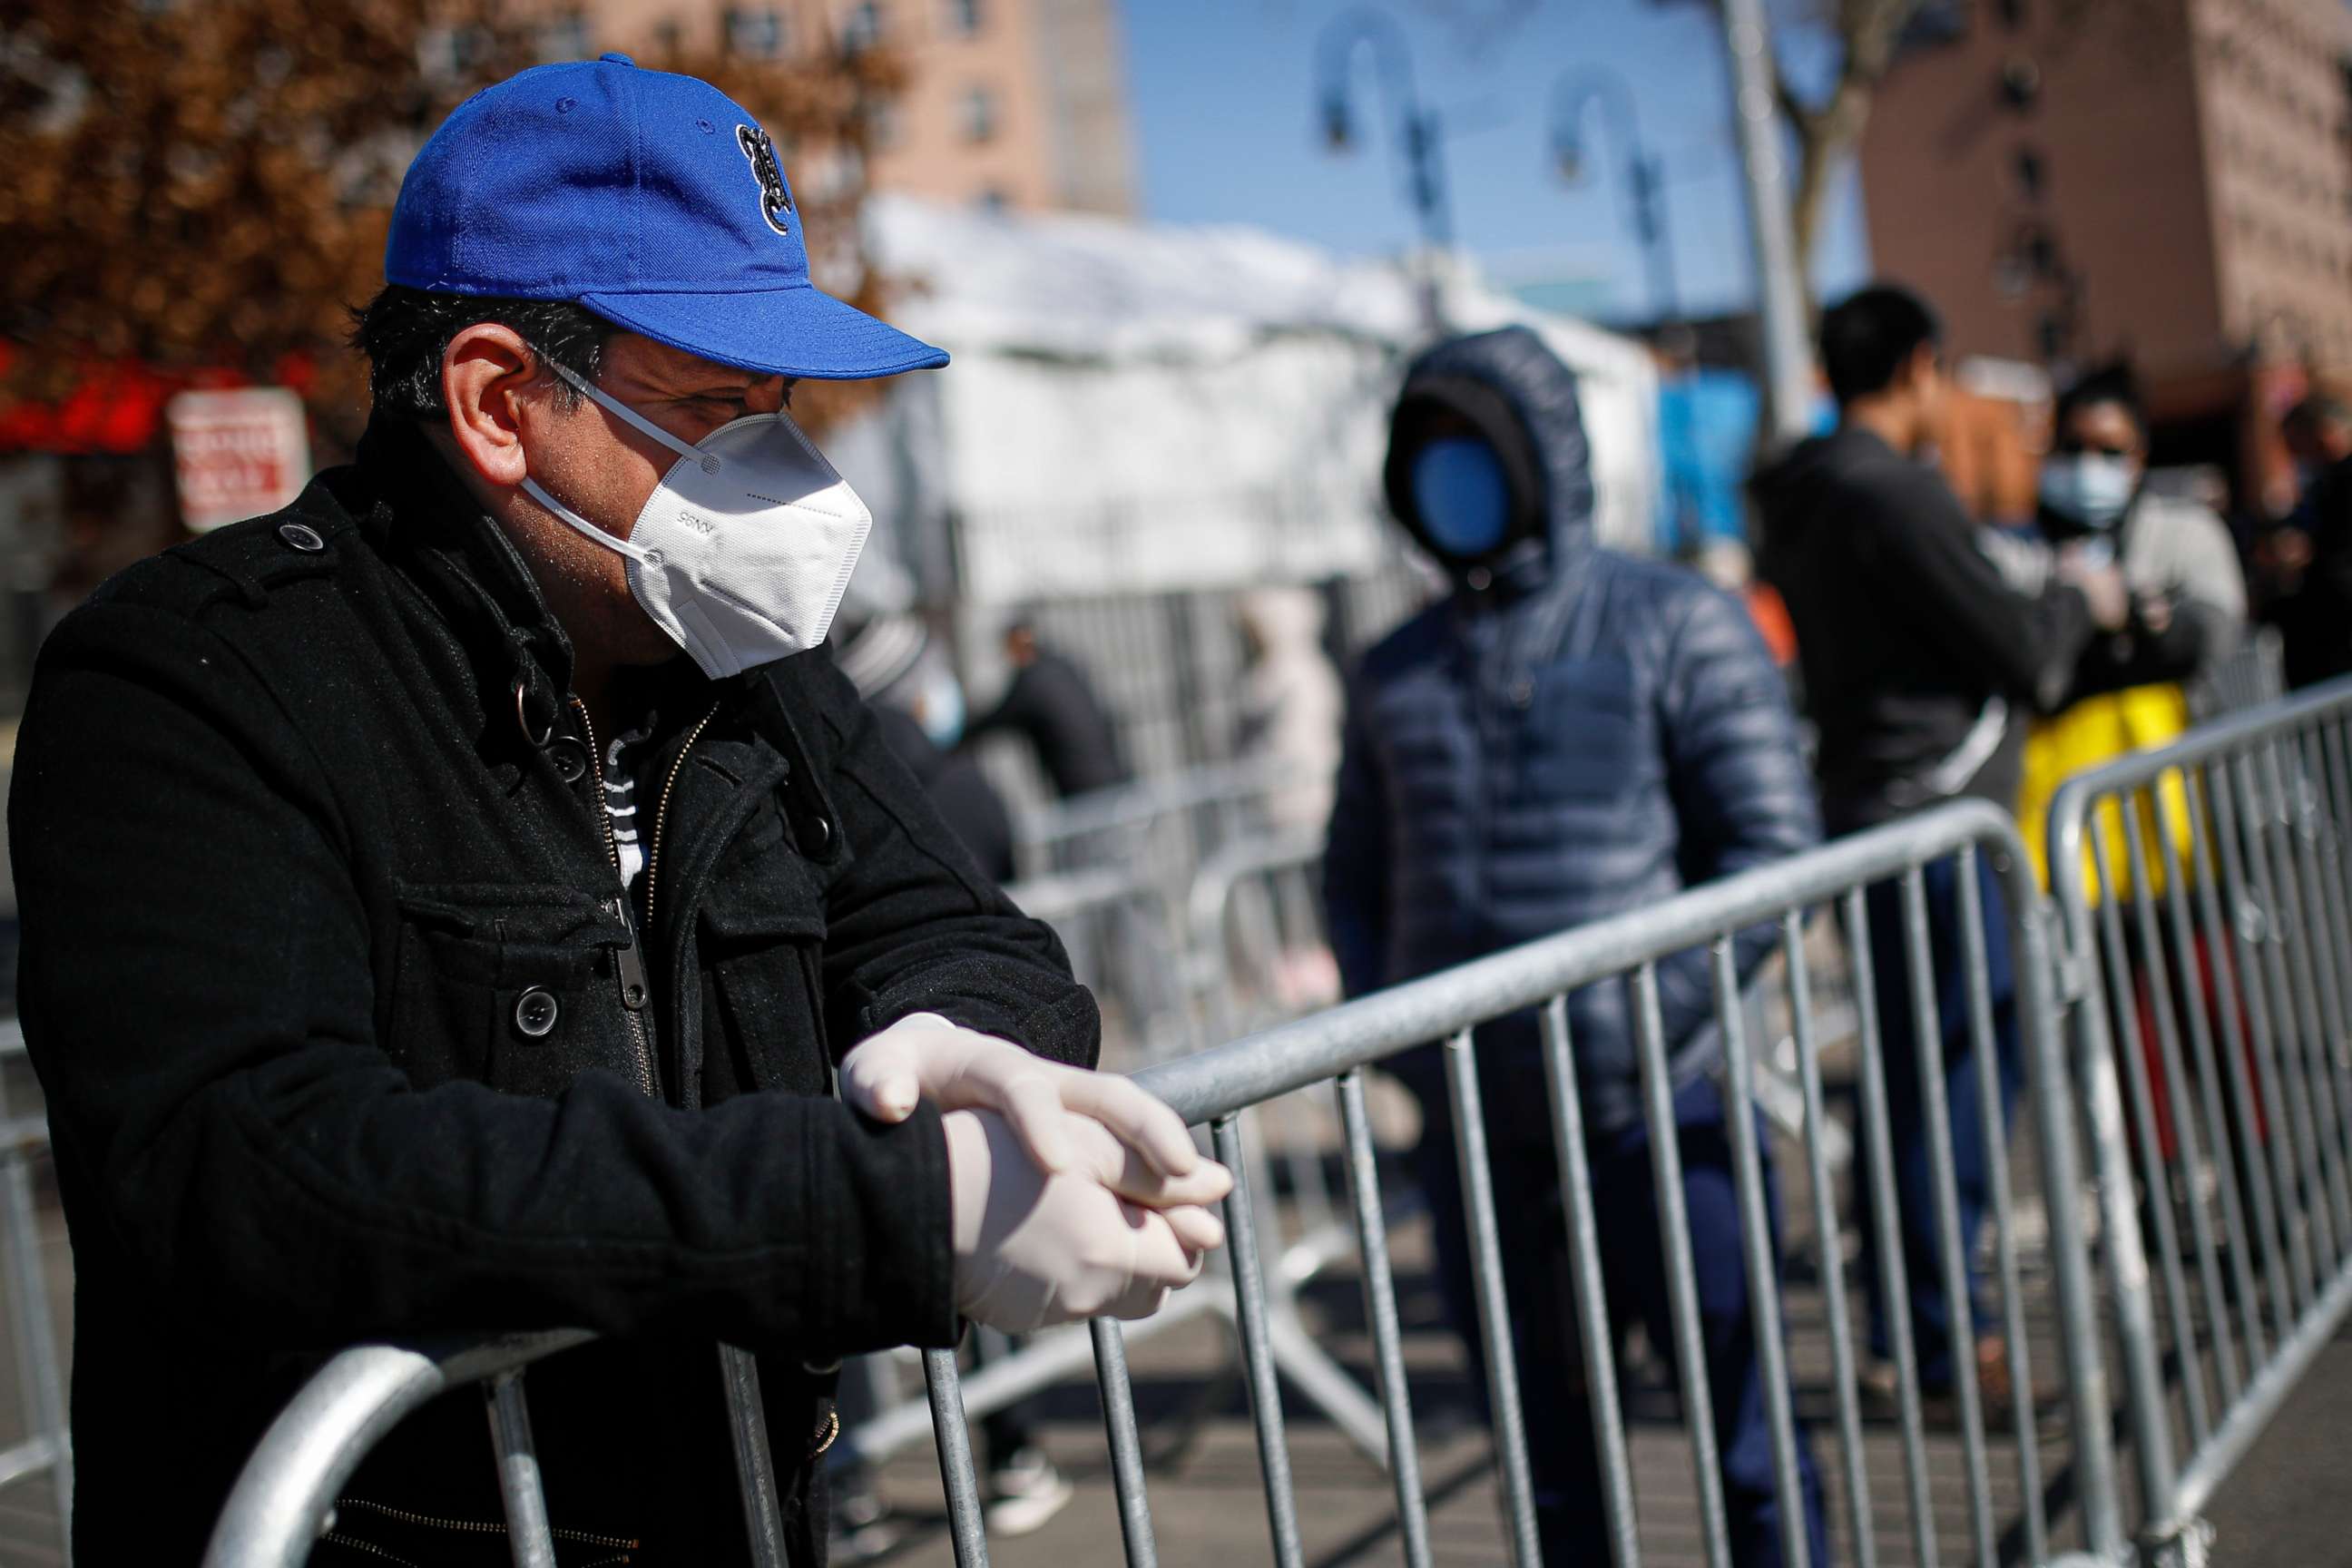 PHOTO: A patient wears a protective mask and gloves while waiting for COVID-19 testing outside Elmhurst Hospital Center, March 27, 2020, in New York.